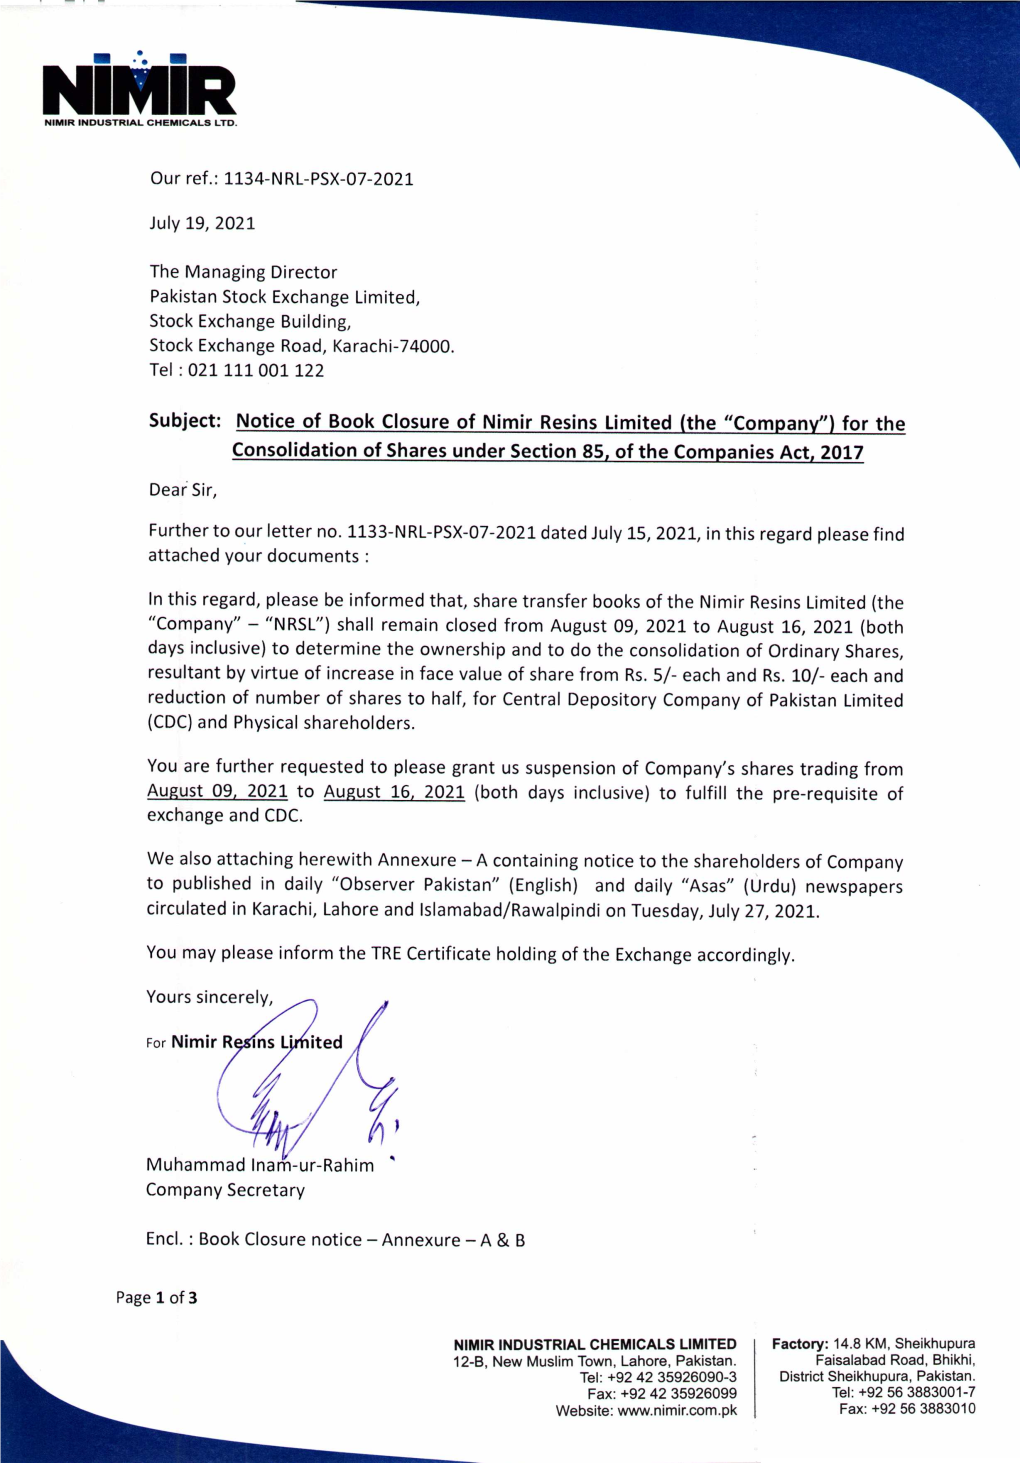 Subject: Notice of Book Closure of Nimir Resinslimited (The "Company") for the Consolidation of Sharesunder Section 85